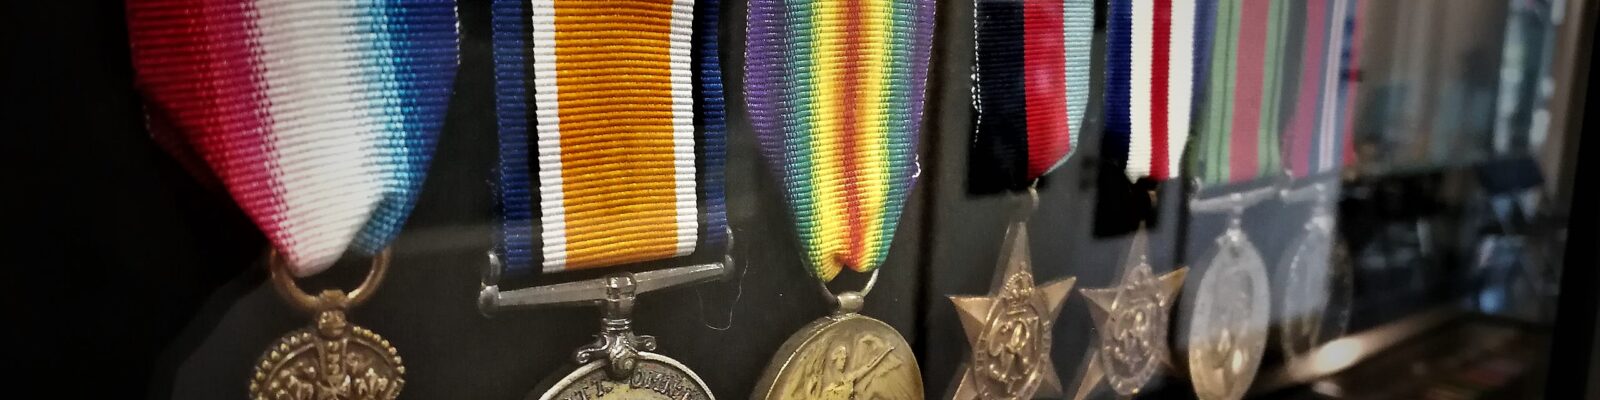 Major John Windham Meade's medals, donated by his son, on display on the museum